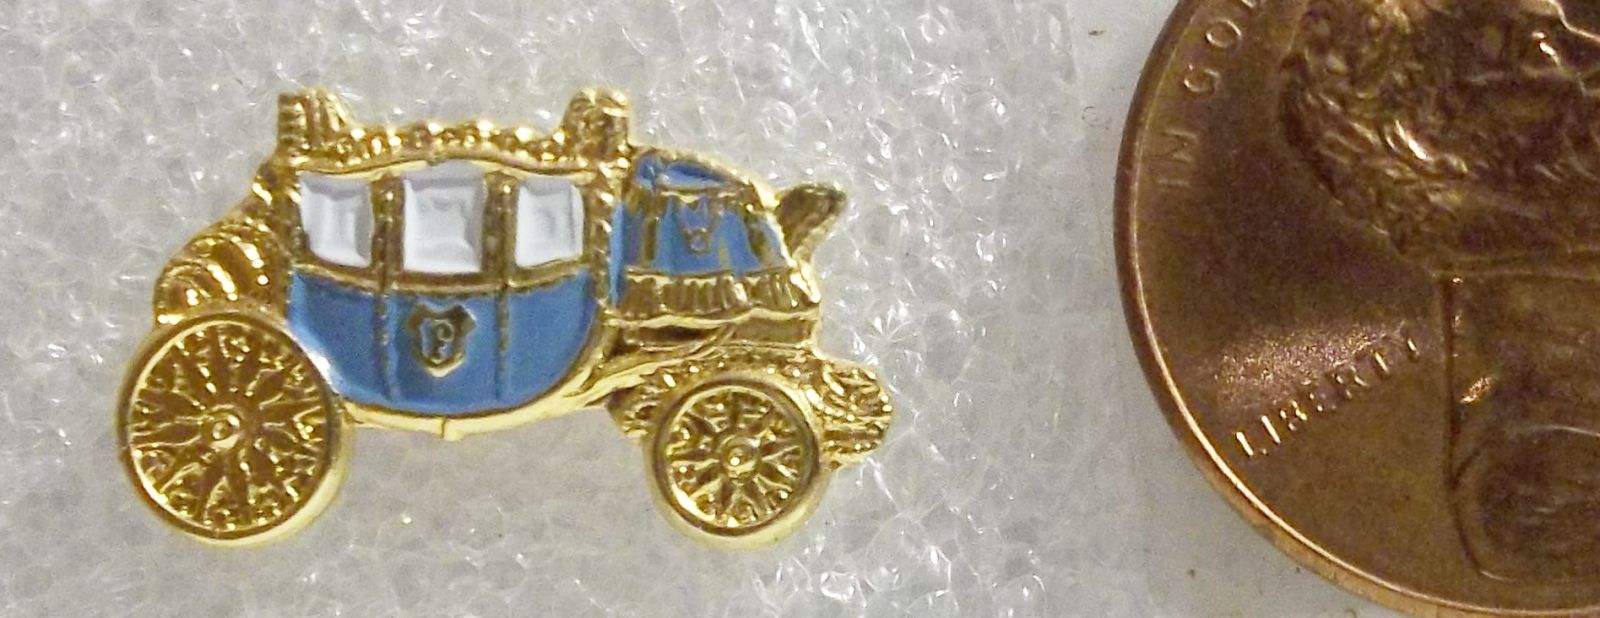 Buick Related Pins